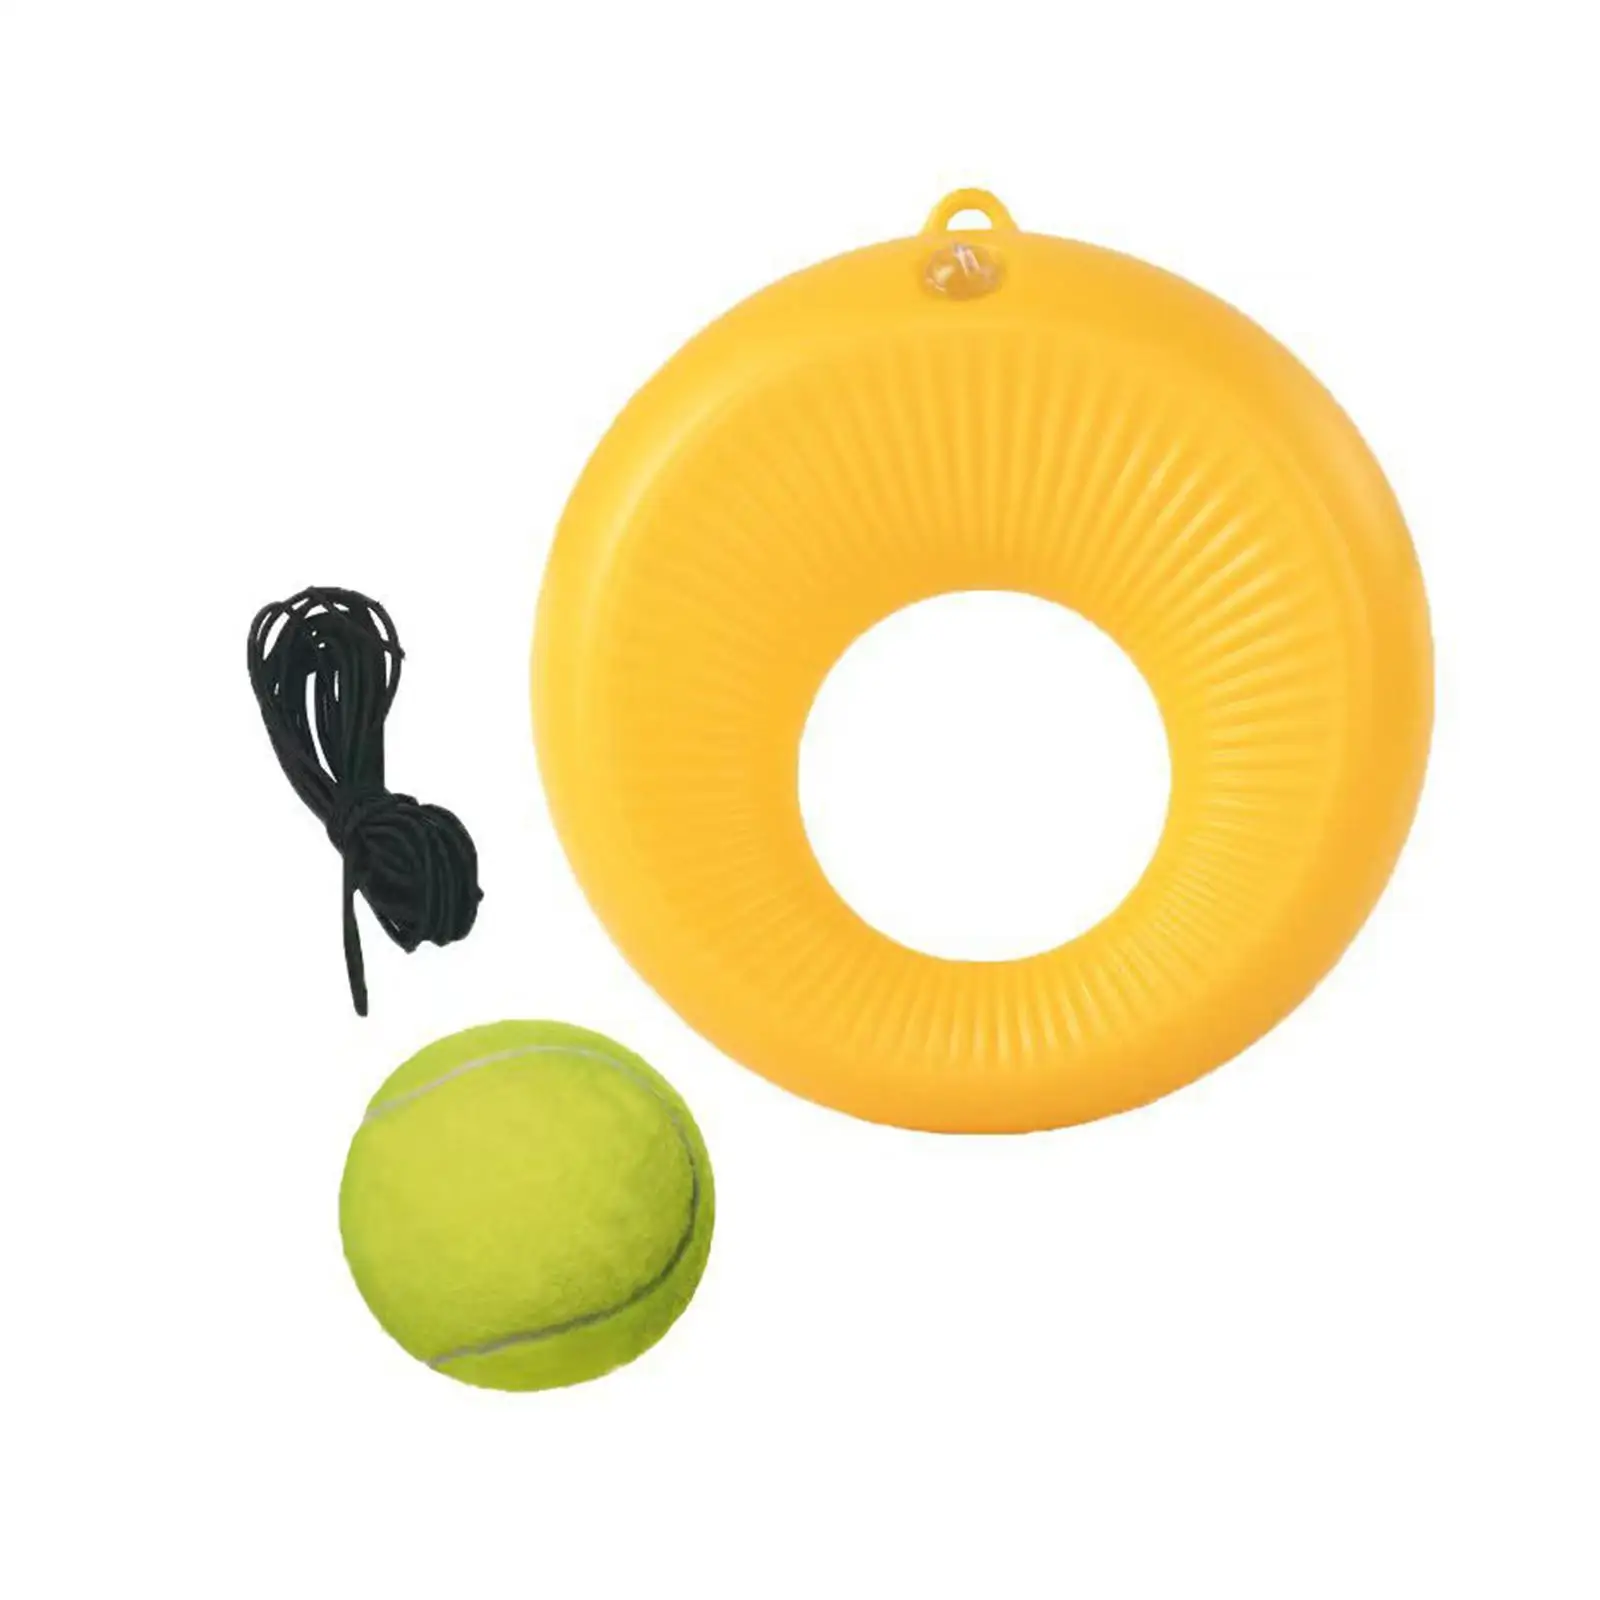 Tennis Rebound Ball with String 1x Trainer Base, 1x Elastic Ropes, 1x Ball Professional Exercise Tennis Trainer for Kids Adults